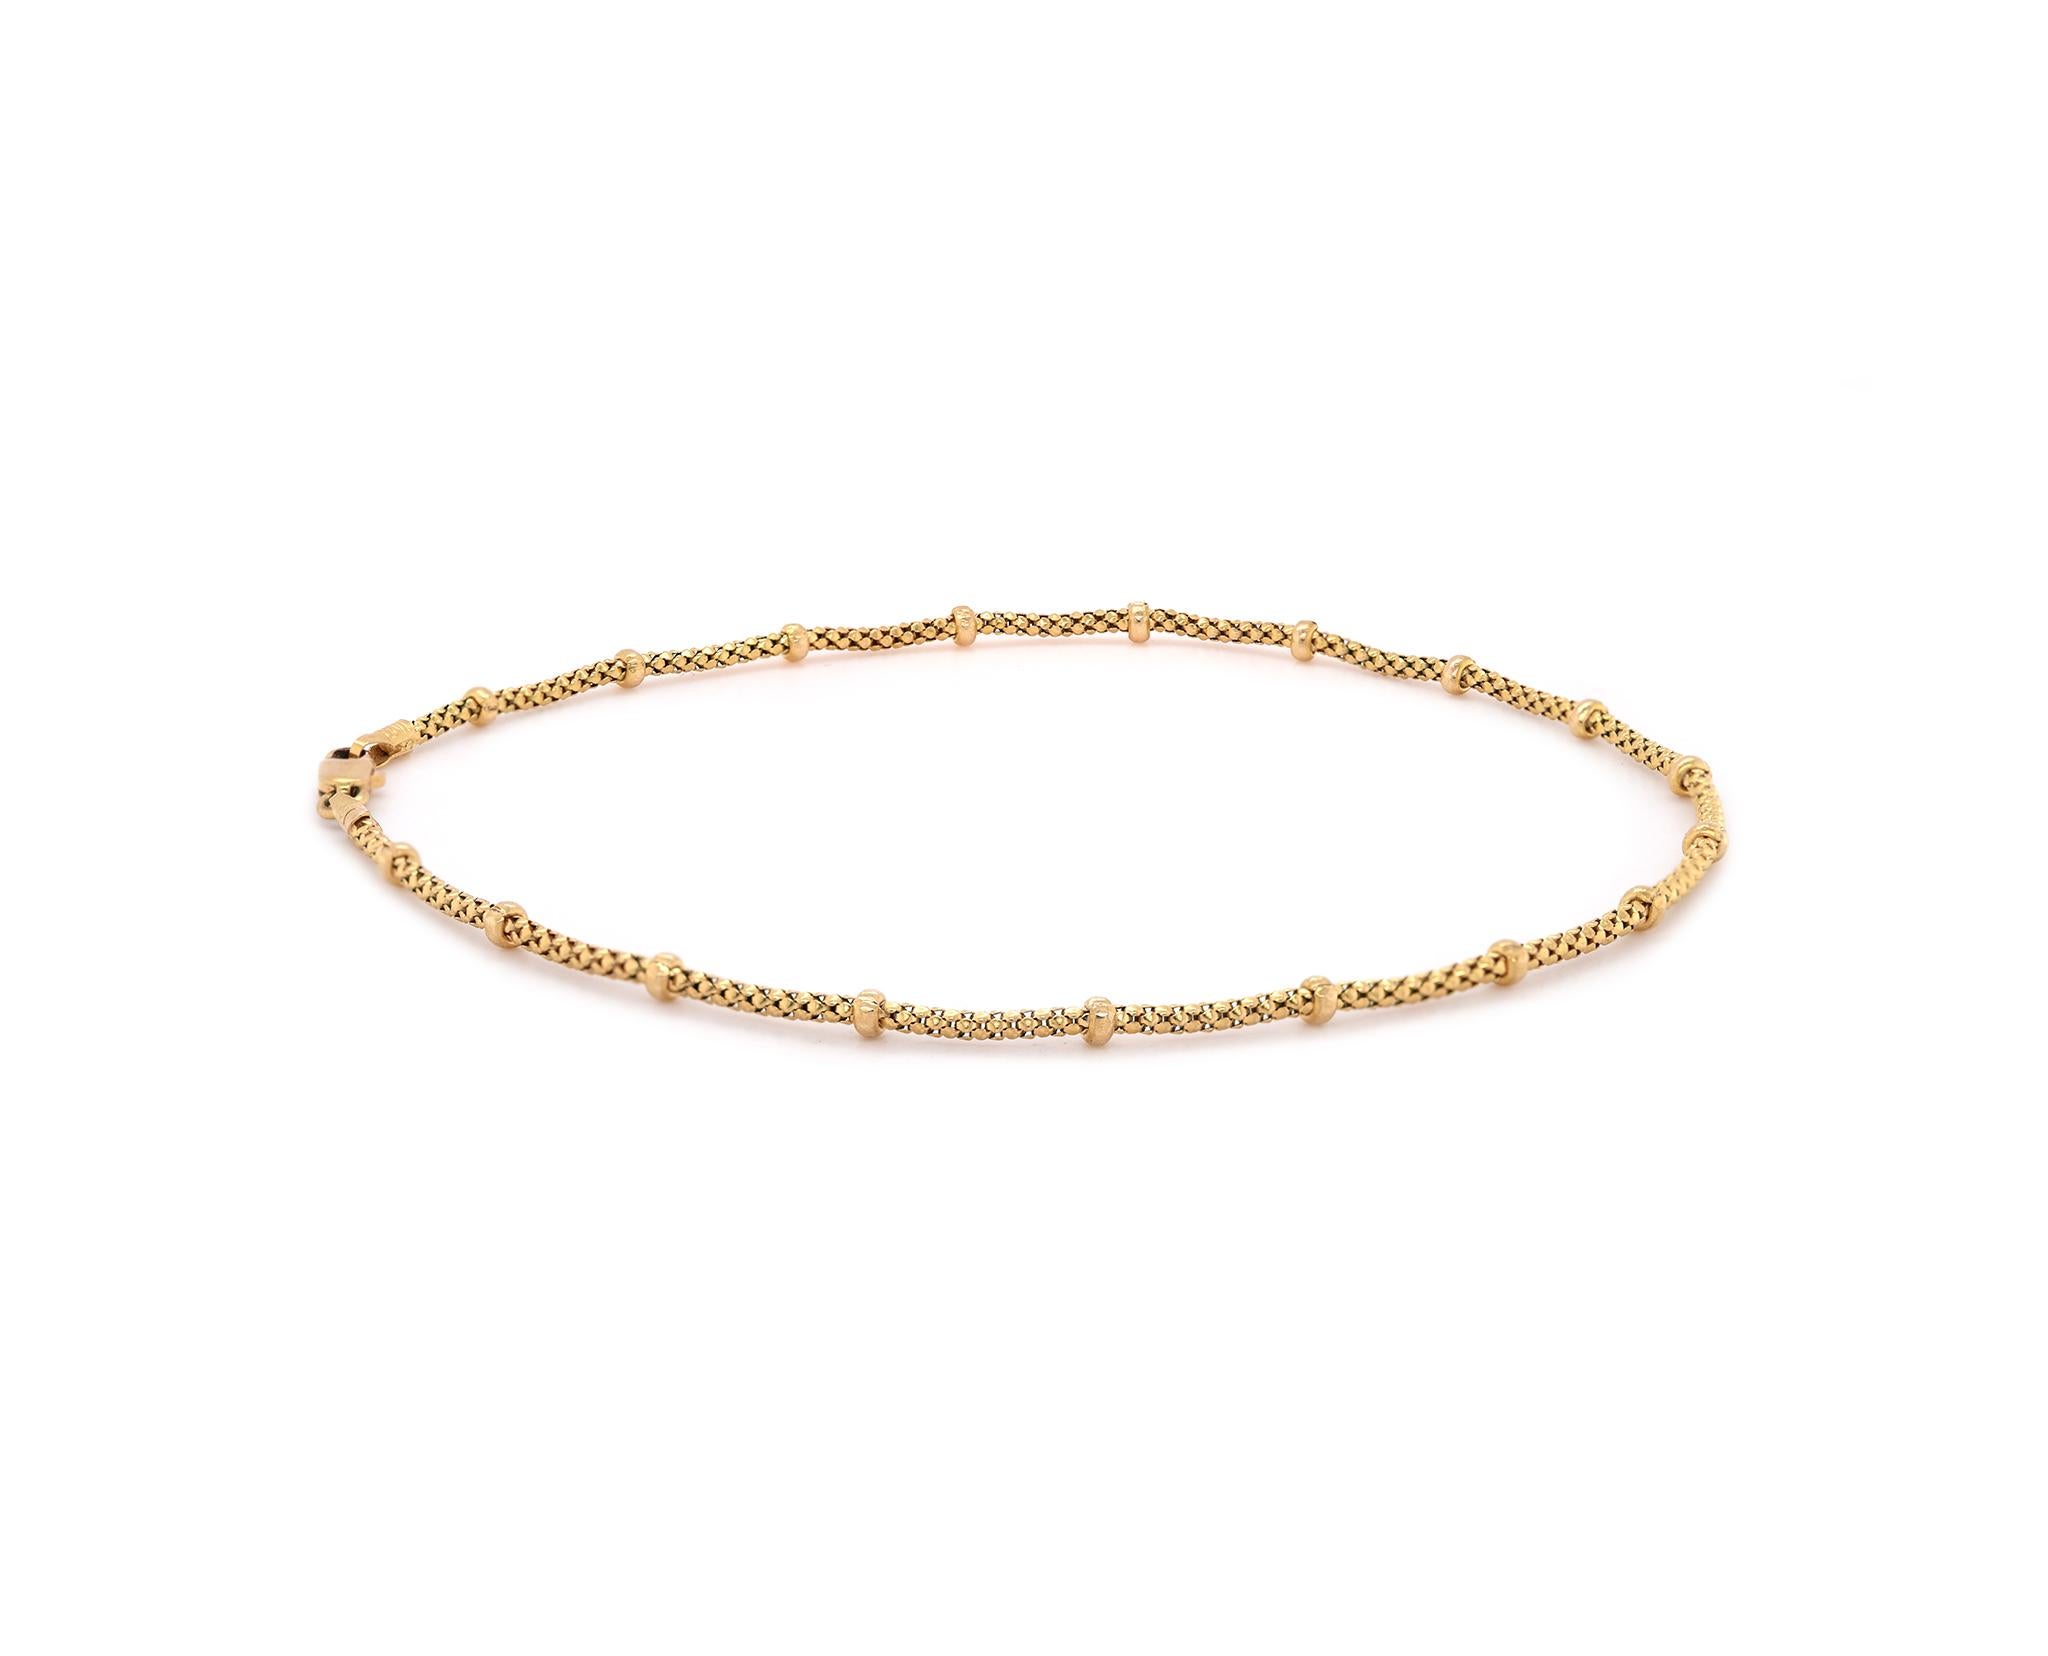 Designer: custom
Material: 14K yellow gold 
Dimensions: bracelet will fit up to a 9.5-inch wrist
Weight: 3.35 grams
